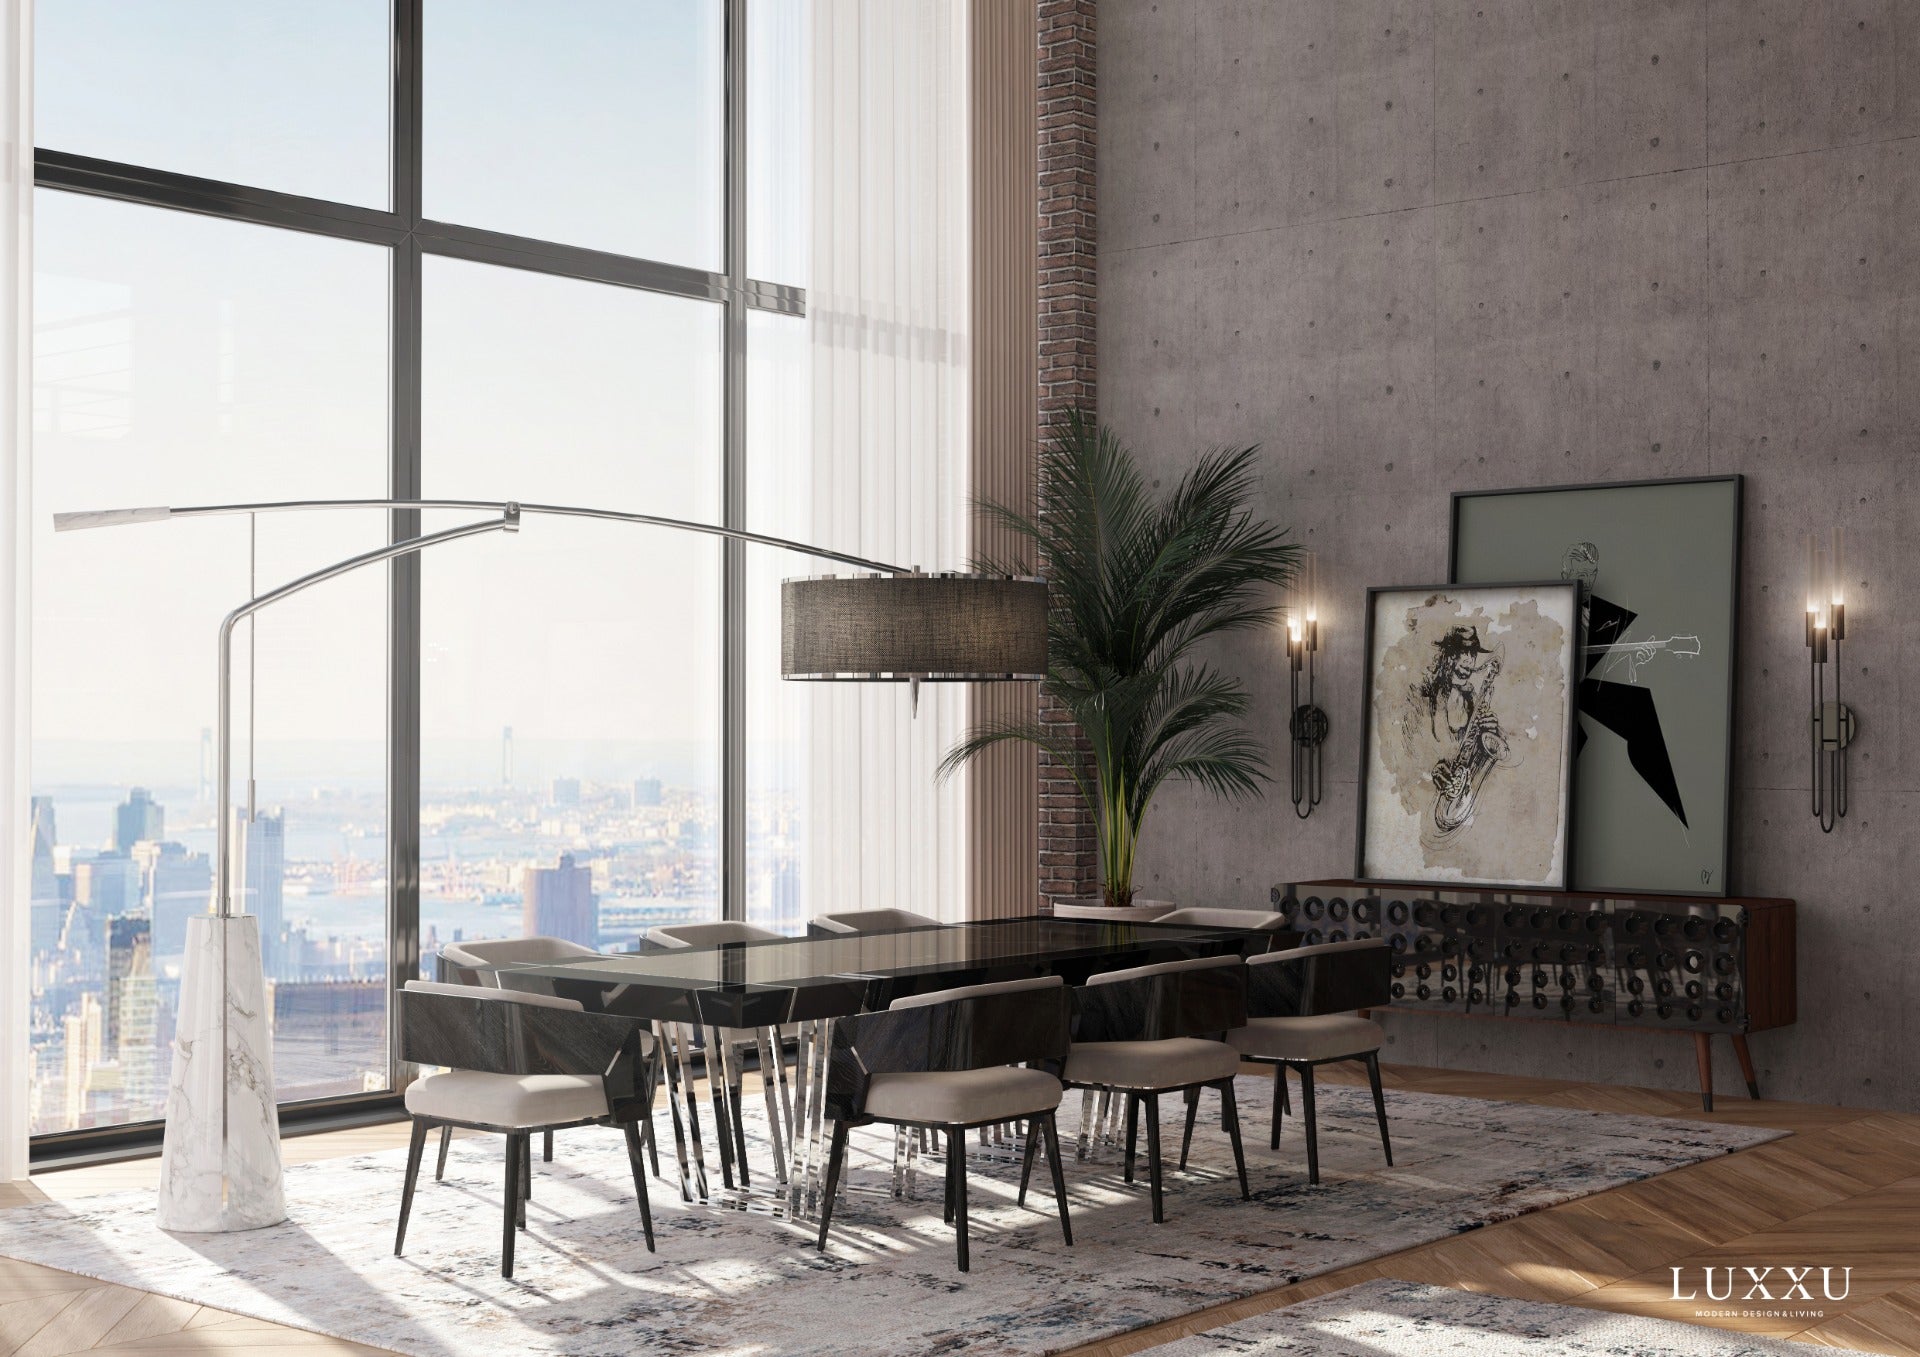 DISCOVER HOW PULLCAST MAKE PART OF LUXXU´S NEW YORK CITY LOFT